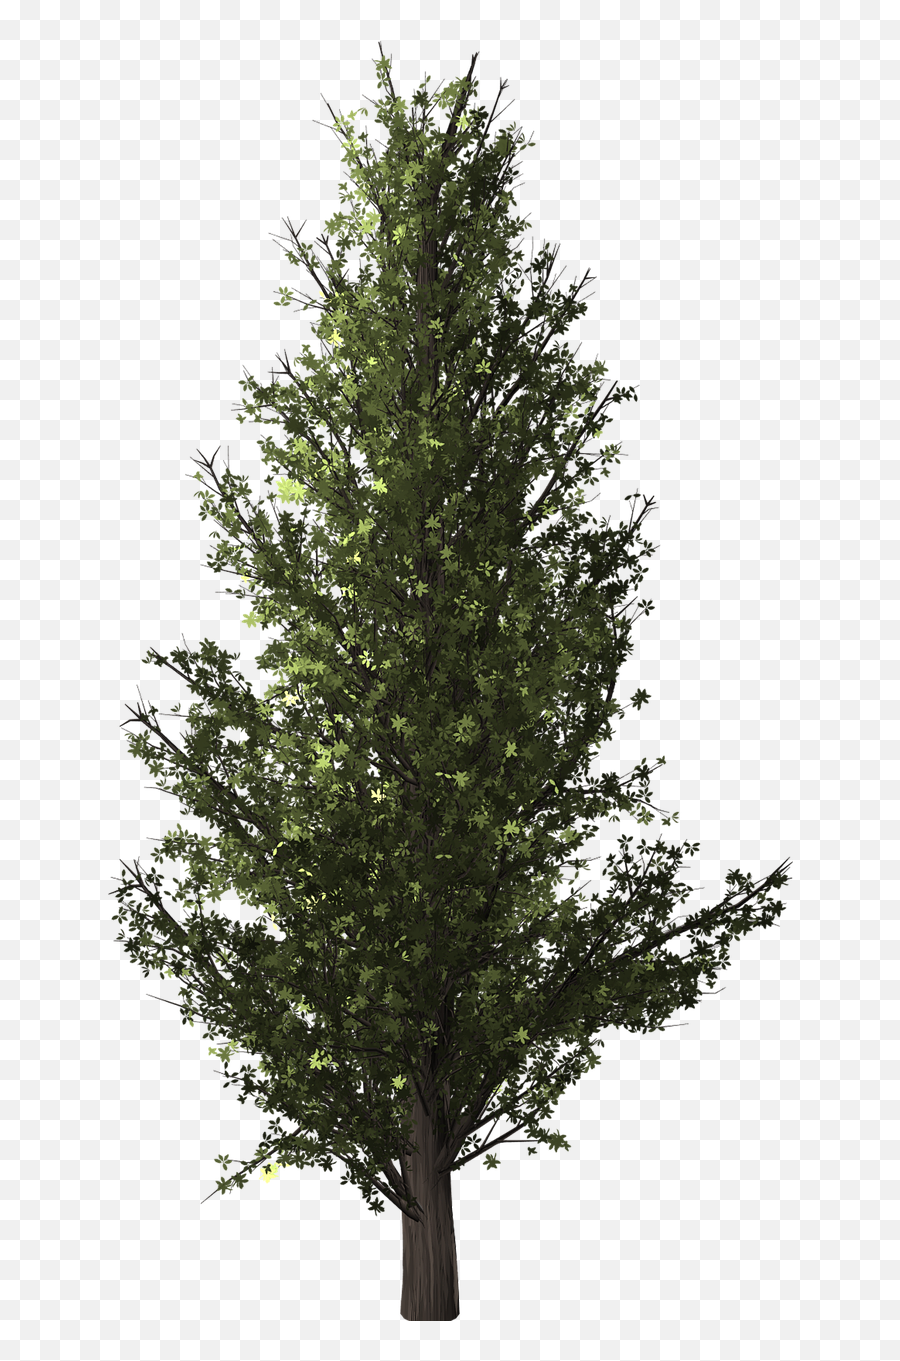 Tree Clip Art Forest Plants Image - Forest Tree Transparent Background Png,Forest Tree Png